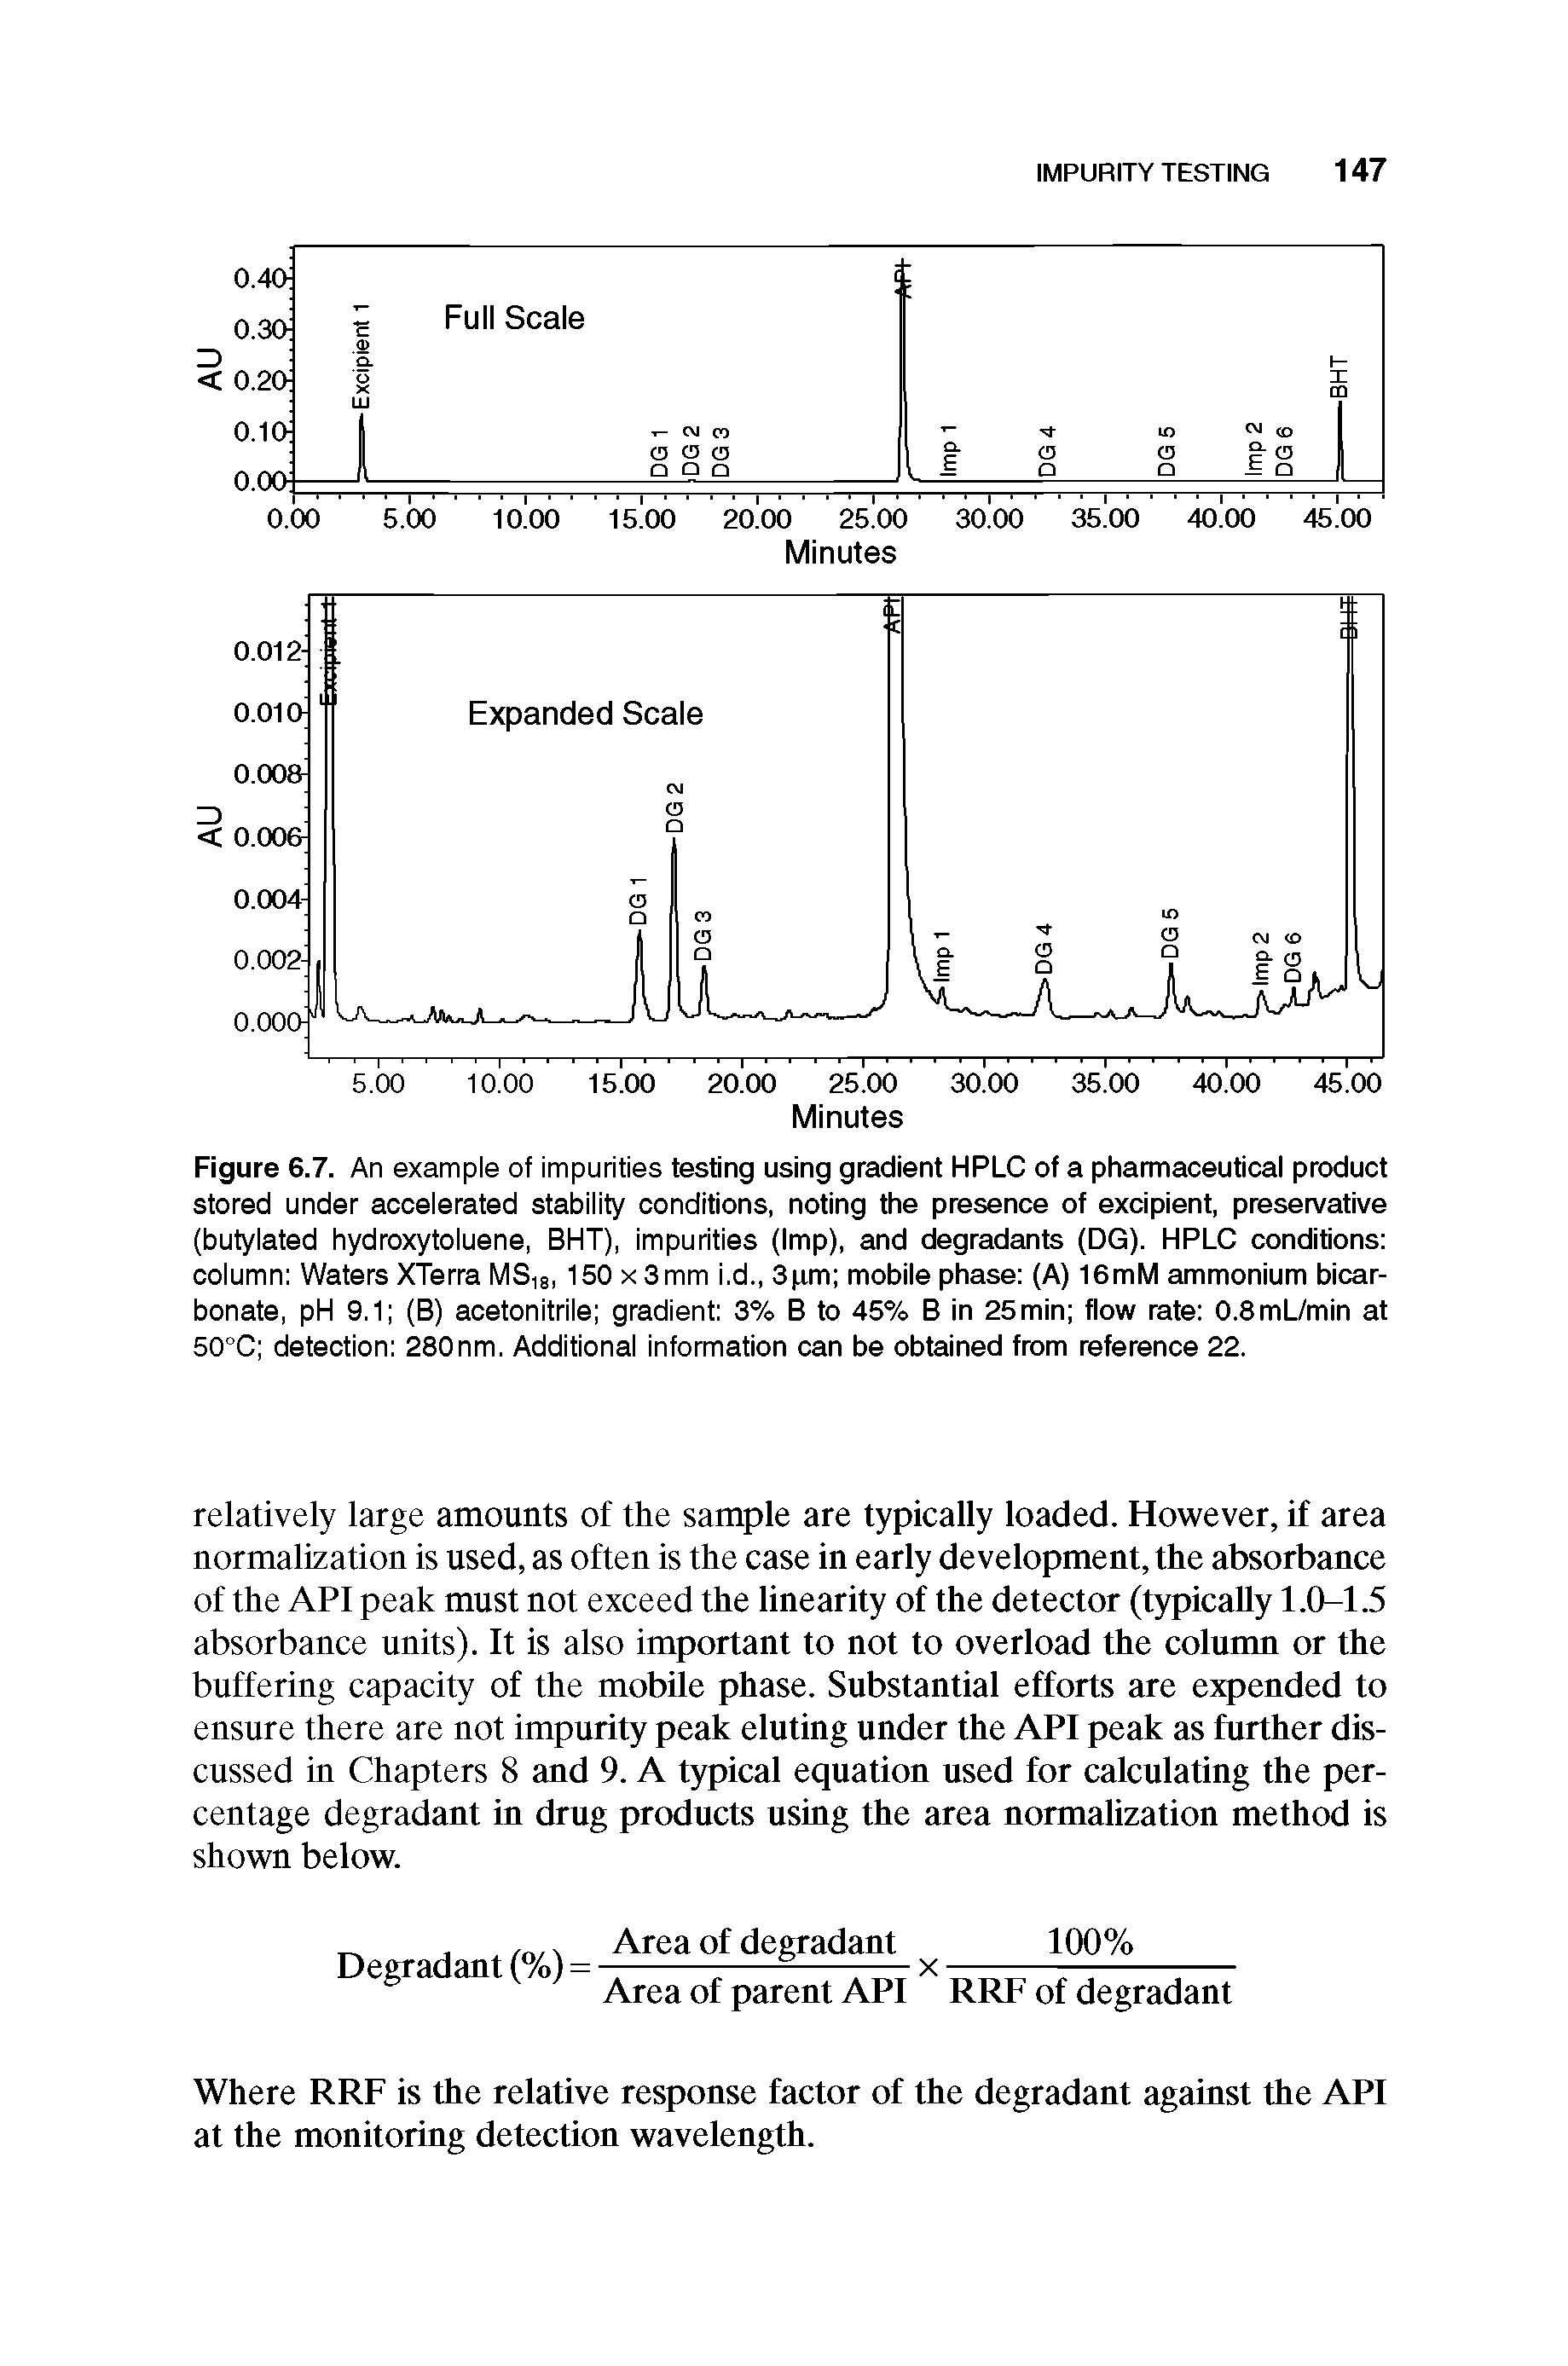 Figure 6.7. An example of impurities testing using gradient HPLC of a pharmaceutical product stored under accelerated stability conditions, noting the presence of excipient, preservative (butylated hydroxytoluene, BHT), impurities (Imp), and degradants (DG). HPLC conditions column Waters XTerra MS18, 150 x 3mm i.d., 3pm mobile phase (A) 16mM ammonium bicarbonate, pH 9.1 (B) acetonitrile gradient 3% B to 45% B in 25min flow rate 0.8mL/min at 50°C detection 280nm. Additional information can be obtained from reference 22.